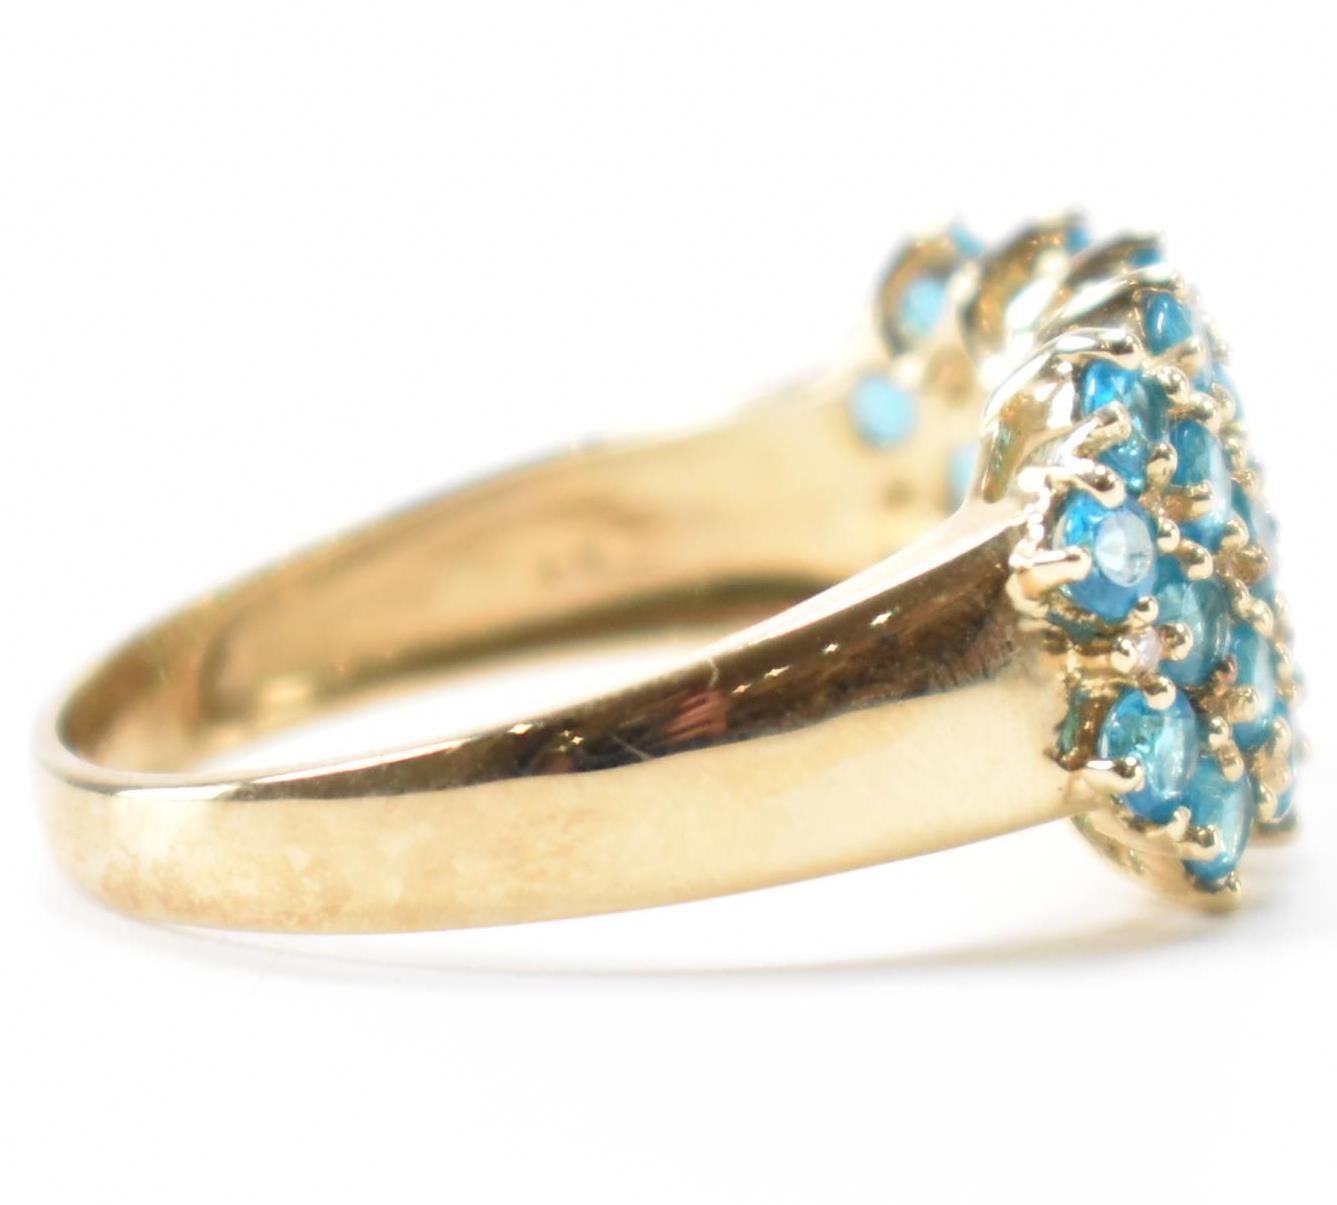 HALLMARKED 9CT GOLD DIAMOND & BLUE STONE CLUSTER RING - Image 5 of 9